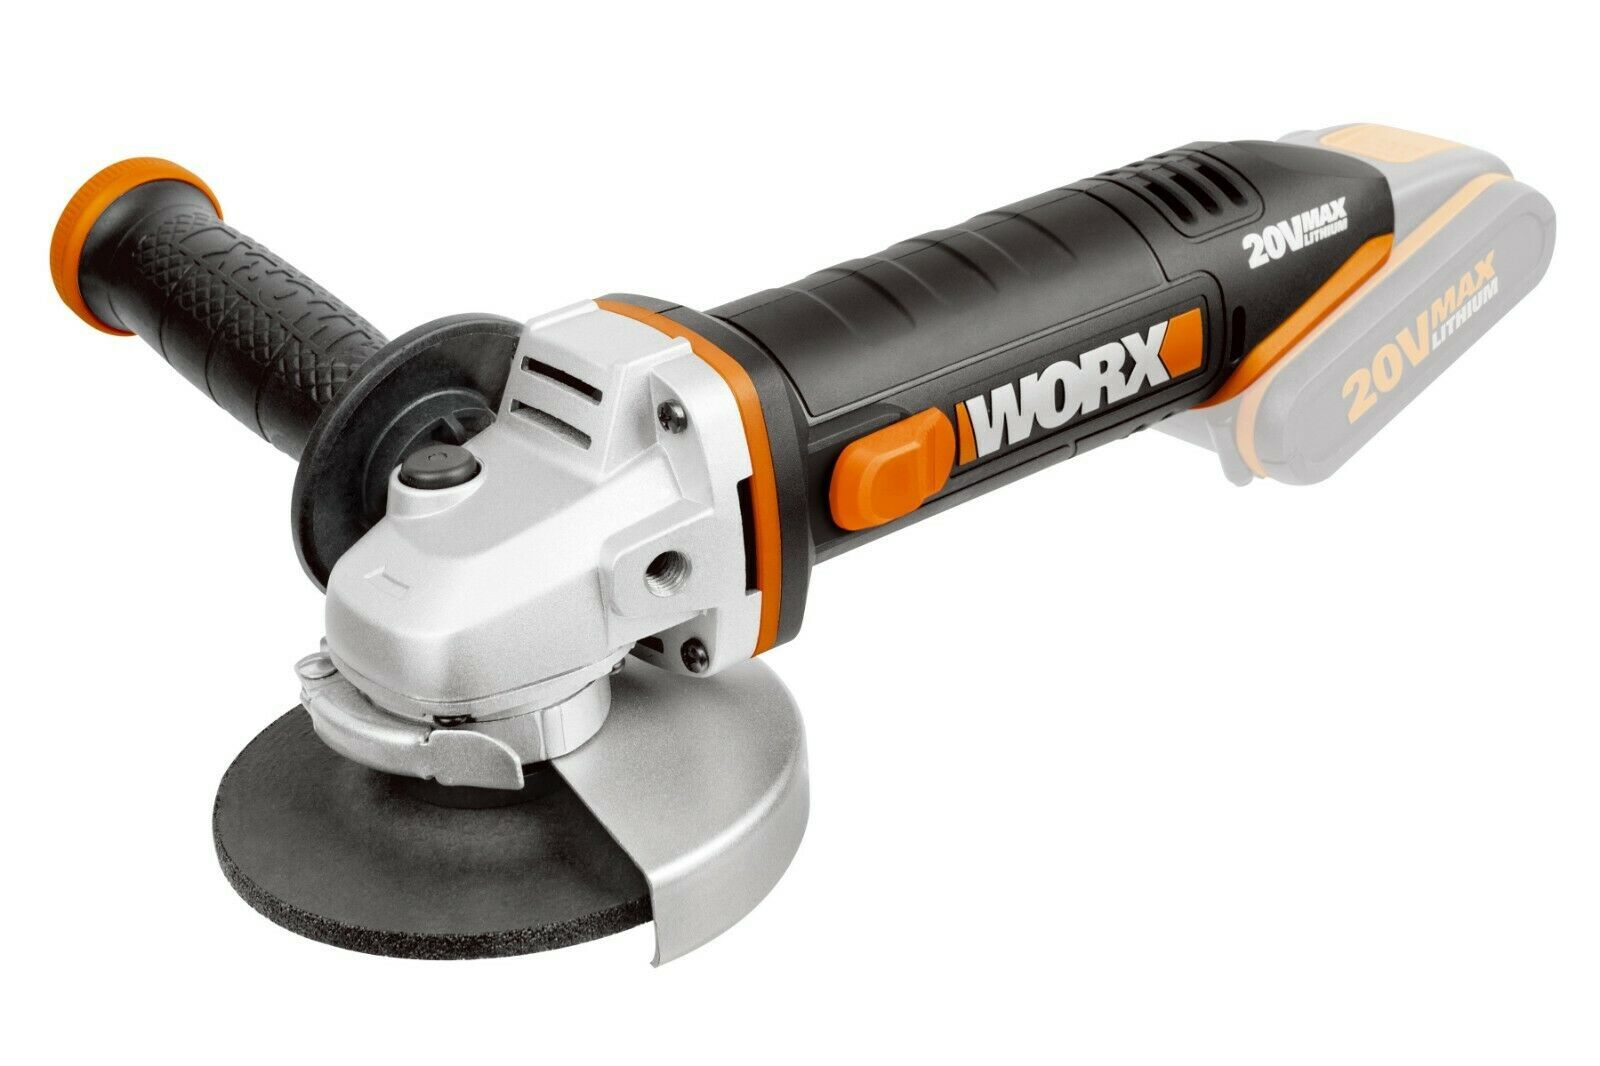 WORX 20V Cordless 115mm Angle Grinder Skin (POWERSHARE Battery / Charger not incl.) - WX800.9